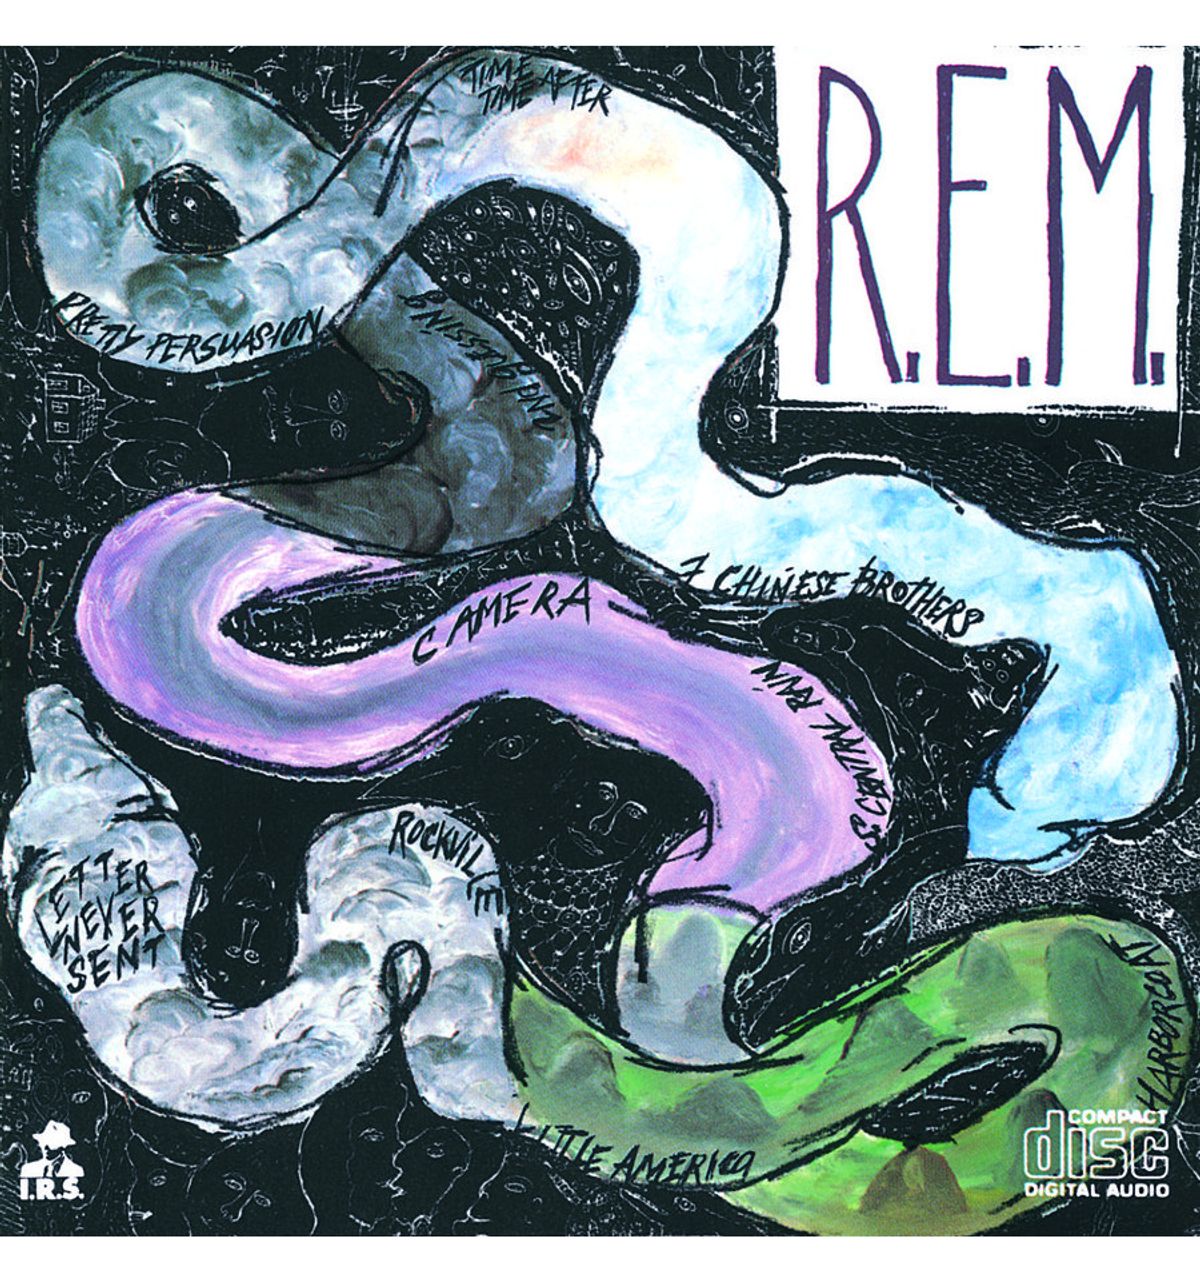 #1984 - R.E.M. – 7 Chinese Brothers